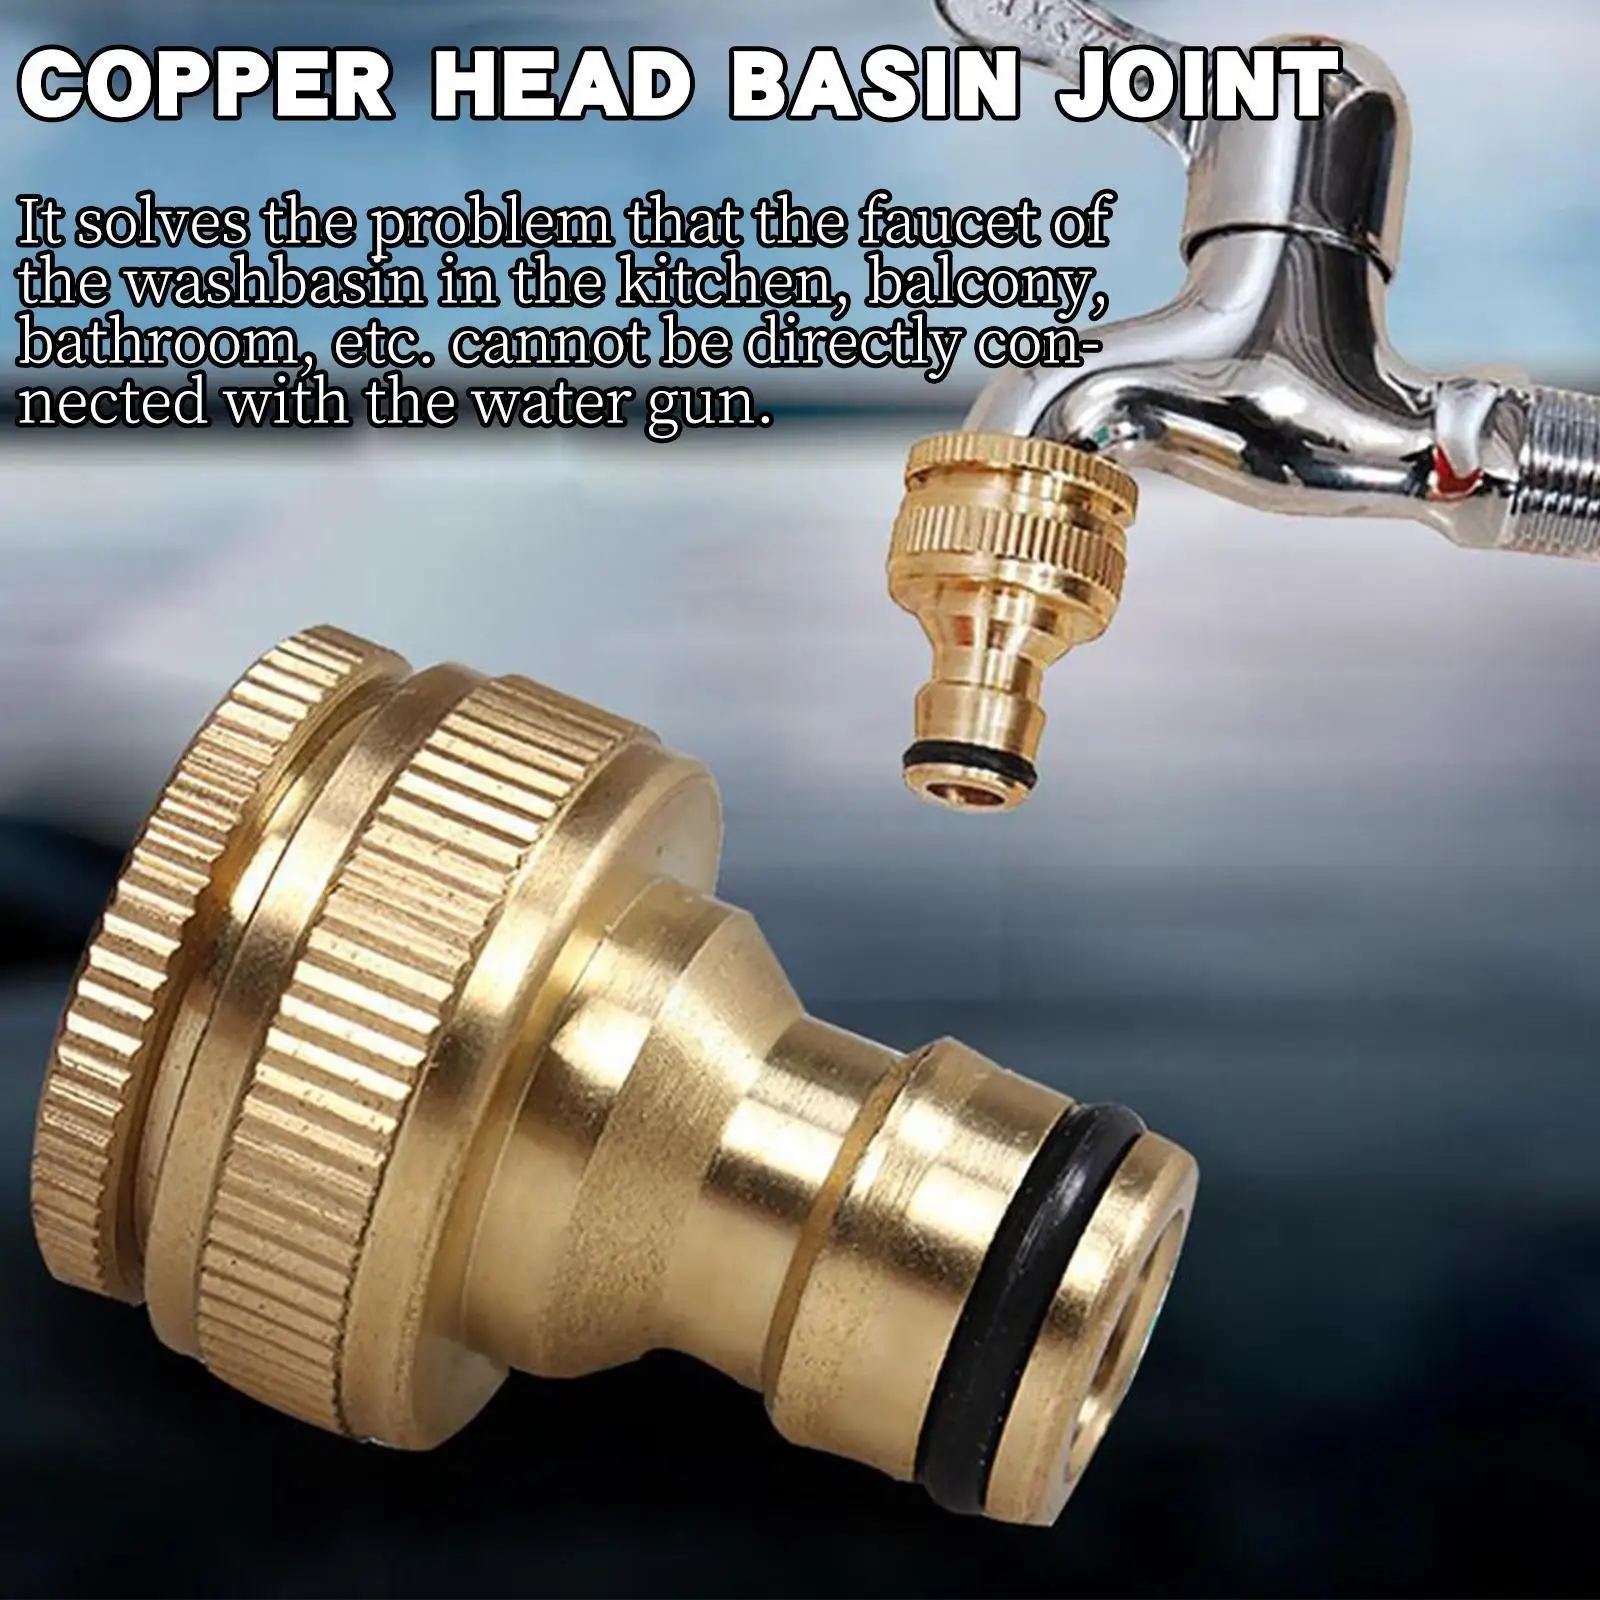 

Universal Tap Kitchen Adapters Brass Faucet Tap Connector Garden Hose Pipe Fitting Joiner Fit Adaptor Watering Mixer Tool B E7h1